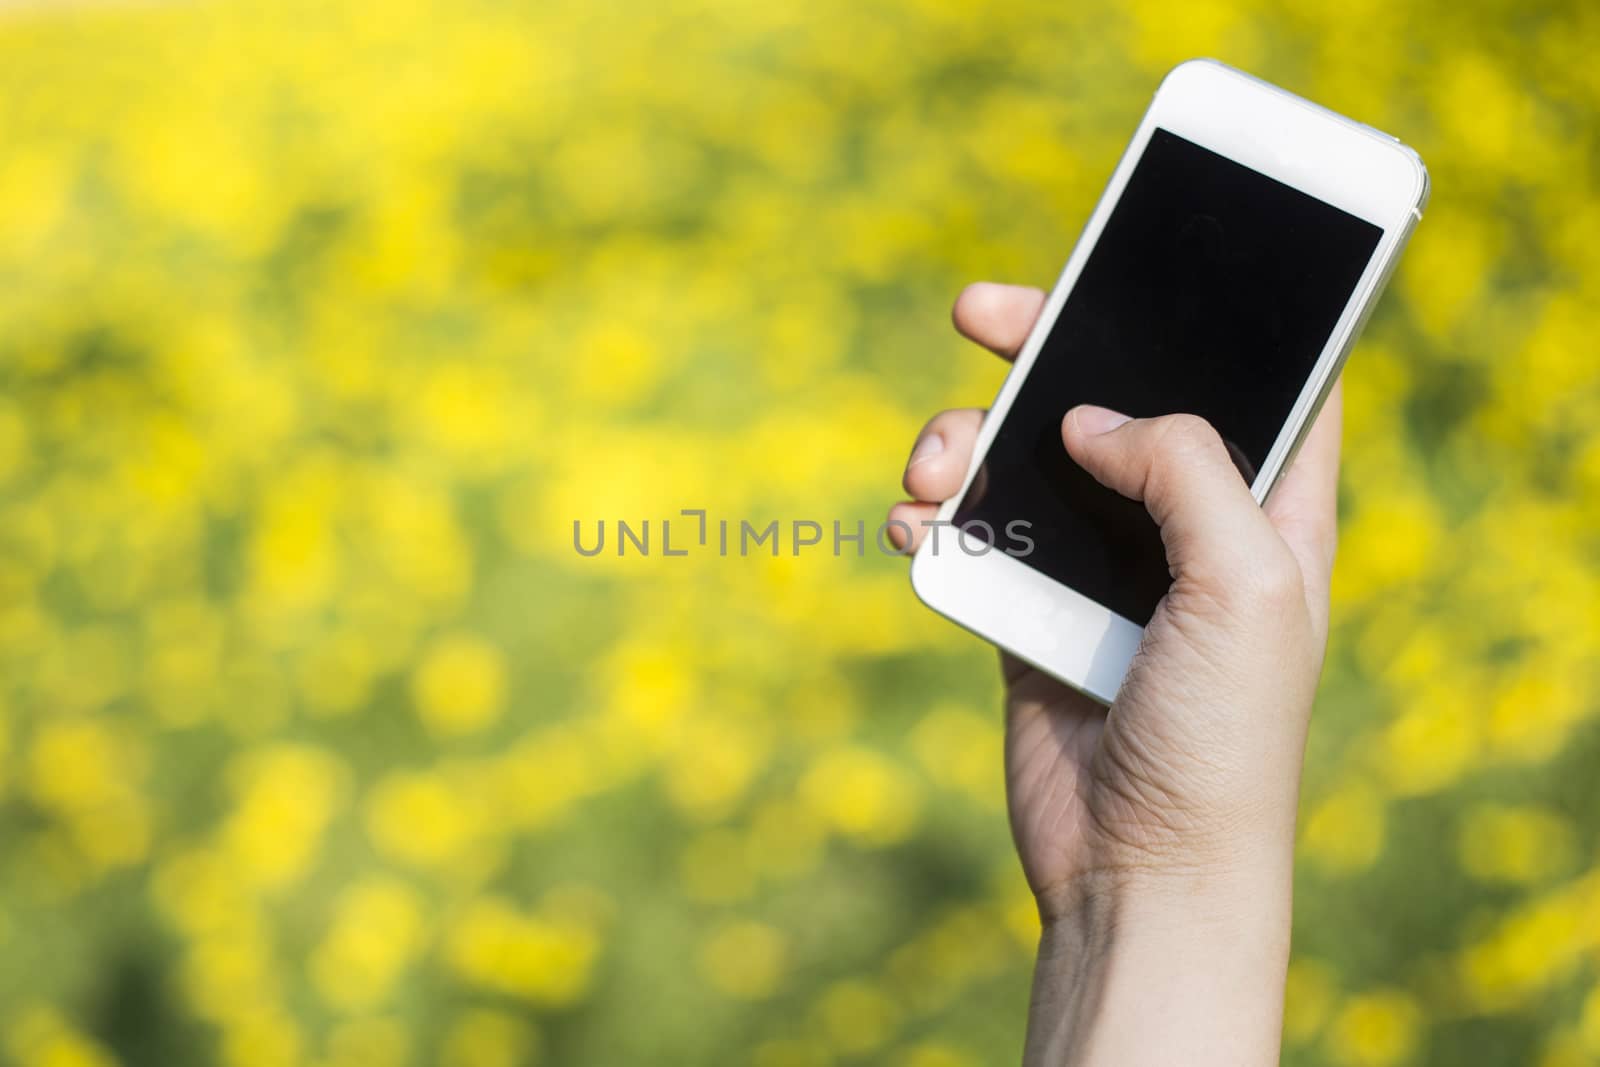 Woman hand holding smartphone against spring green and yellow flowers background